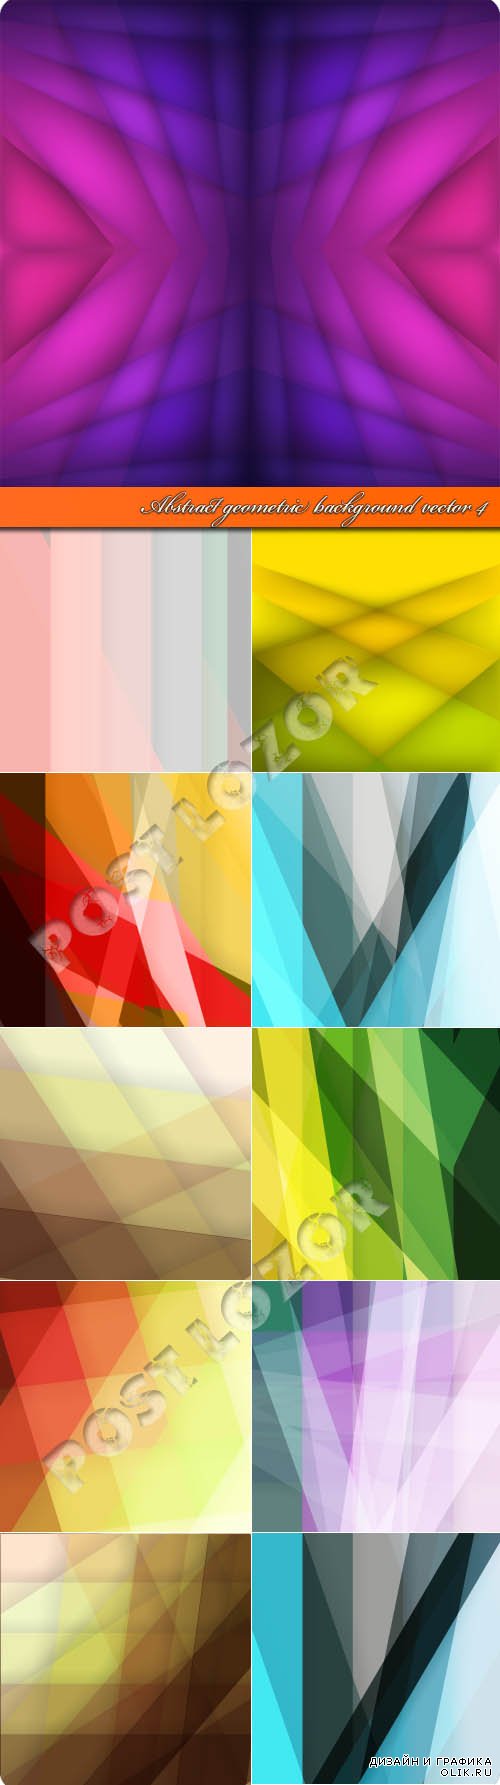 Abstract geometric background vector 4